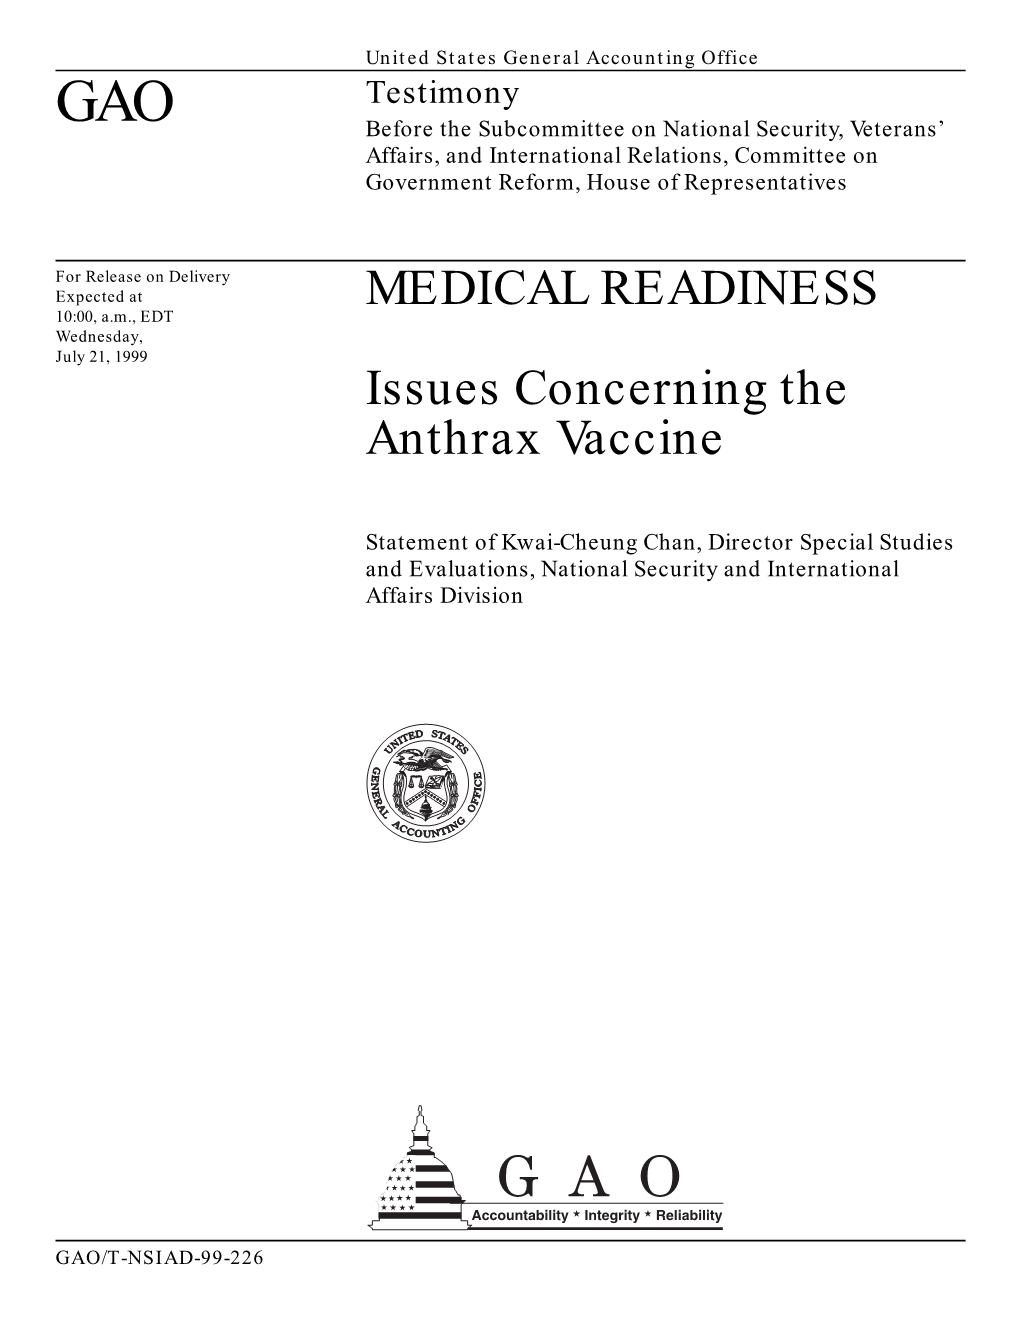 T-NSIAD-99-226 Medical Readiness: Issues Concerning the Anthrax